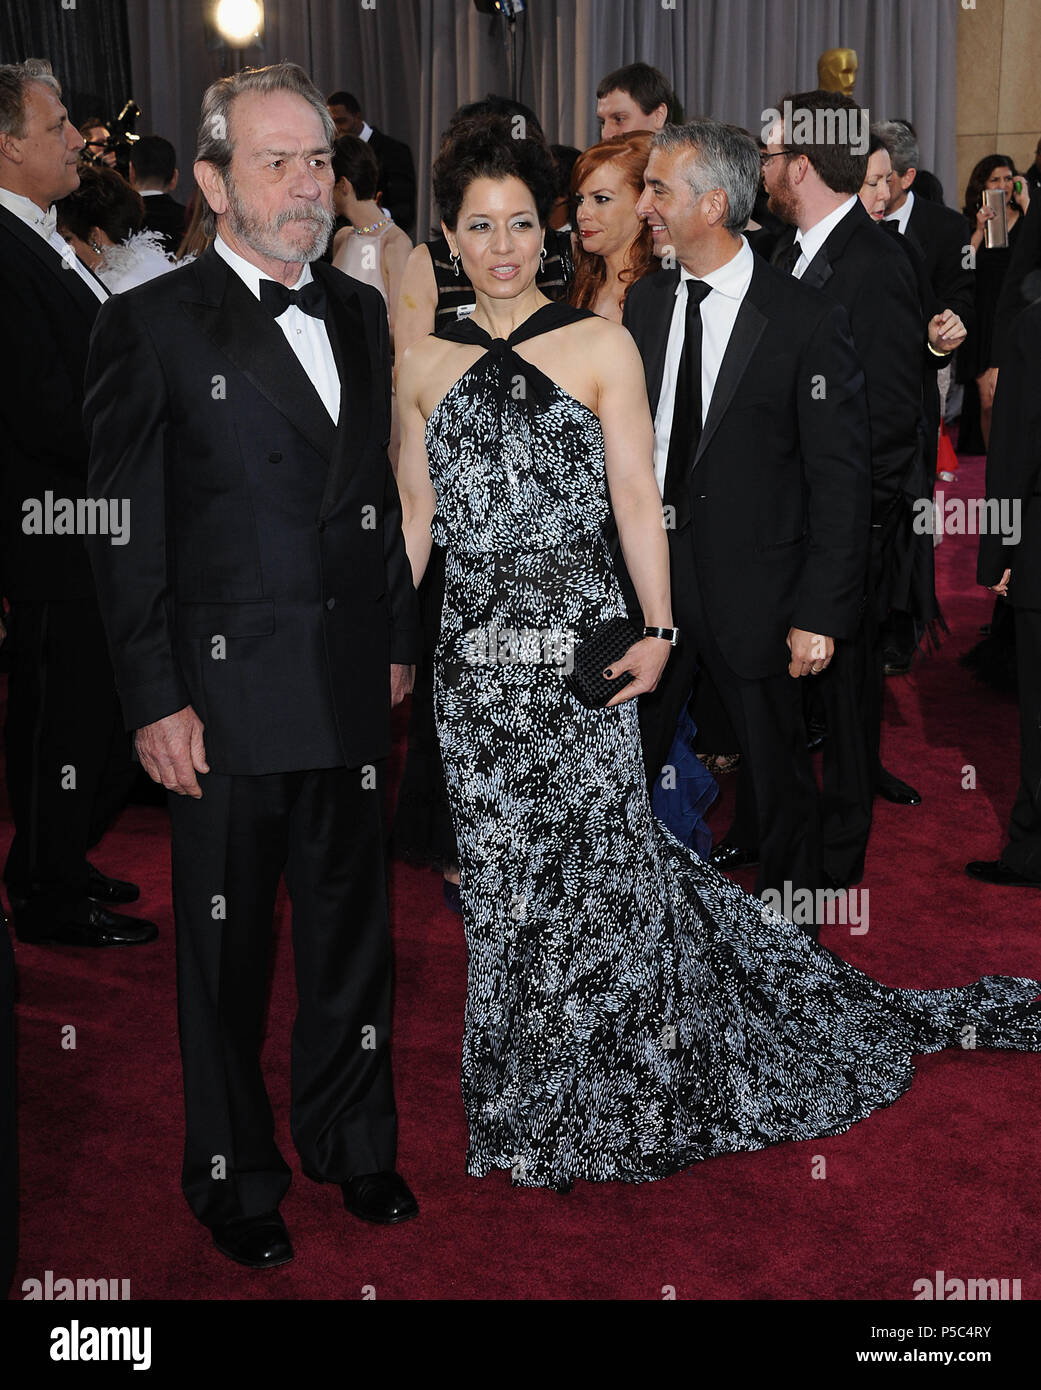 Tommy Lee Jones and wife 159  arriving at the 85th Academy Awards 2013 - Oscars - at the Dolby Theatre in Los Angeles.Tommy Lee Jones and wife 159  ------------- Red Carpet Event, Vertical, USA, Film Industry, Celebrities,  Photography, Bestof, Arts Culture and Entertainment, Topix Celebrities fashion /  Vertical, Best of, Event in Hollywood Life - California,  Red Carpet and backstage, USA, Film Industry, Celebrities,  movie celebrities, TV celebrities, Music celebrities, Photography, Bestof, Arts Culture and Entertainment,  Topix, vertical,  family from from the year , 2013, inquiry tsuni@Ga Stock Photo